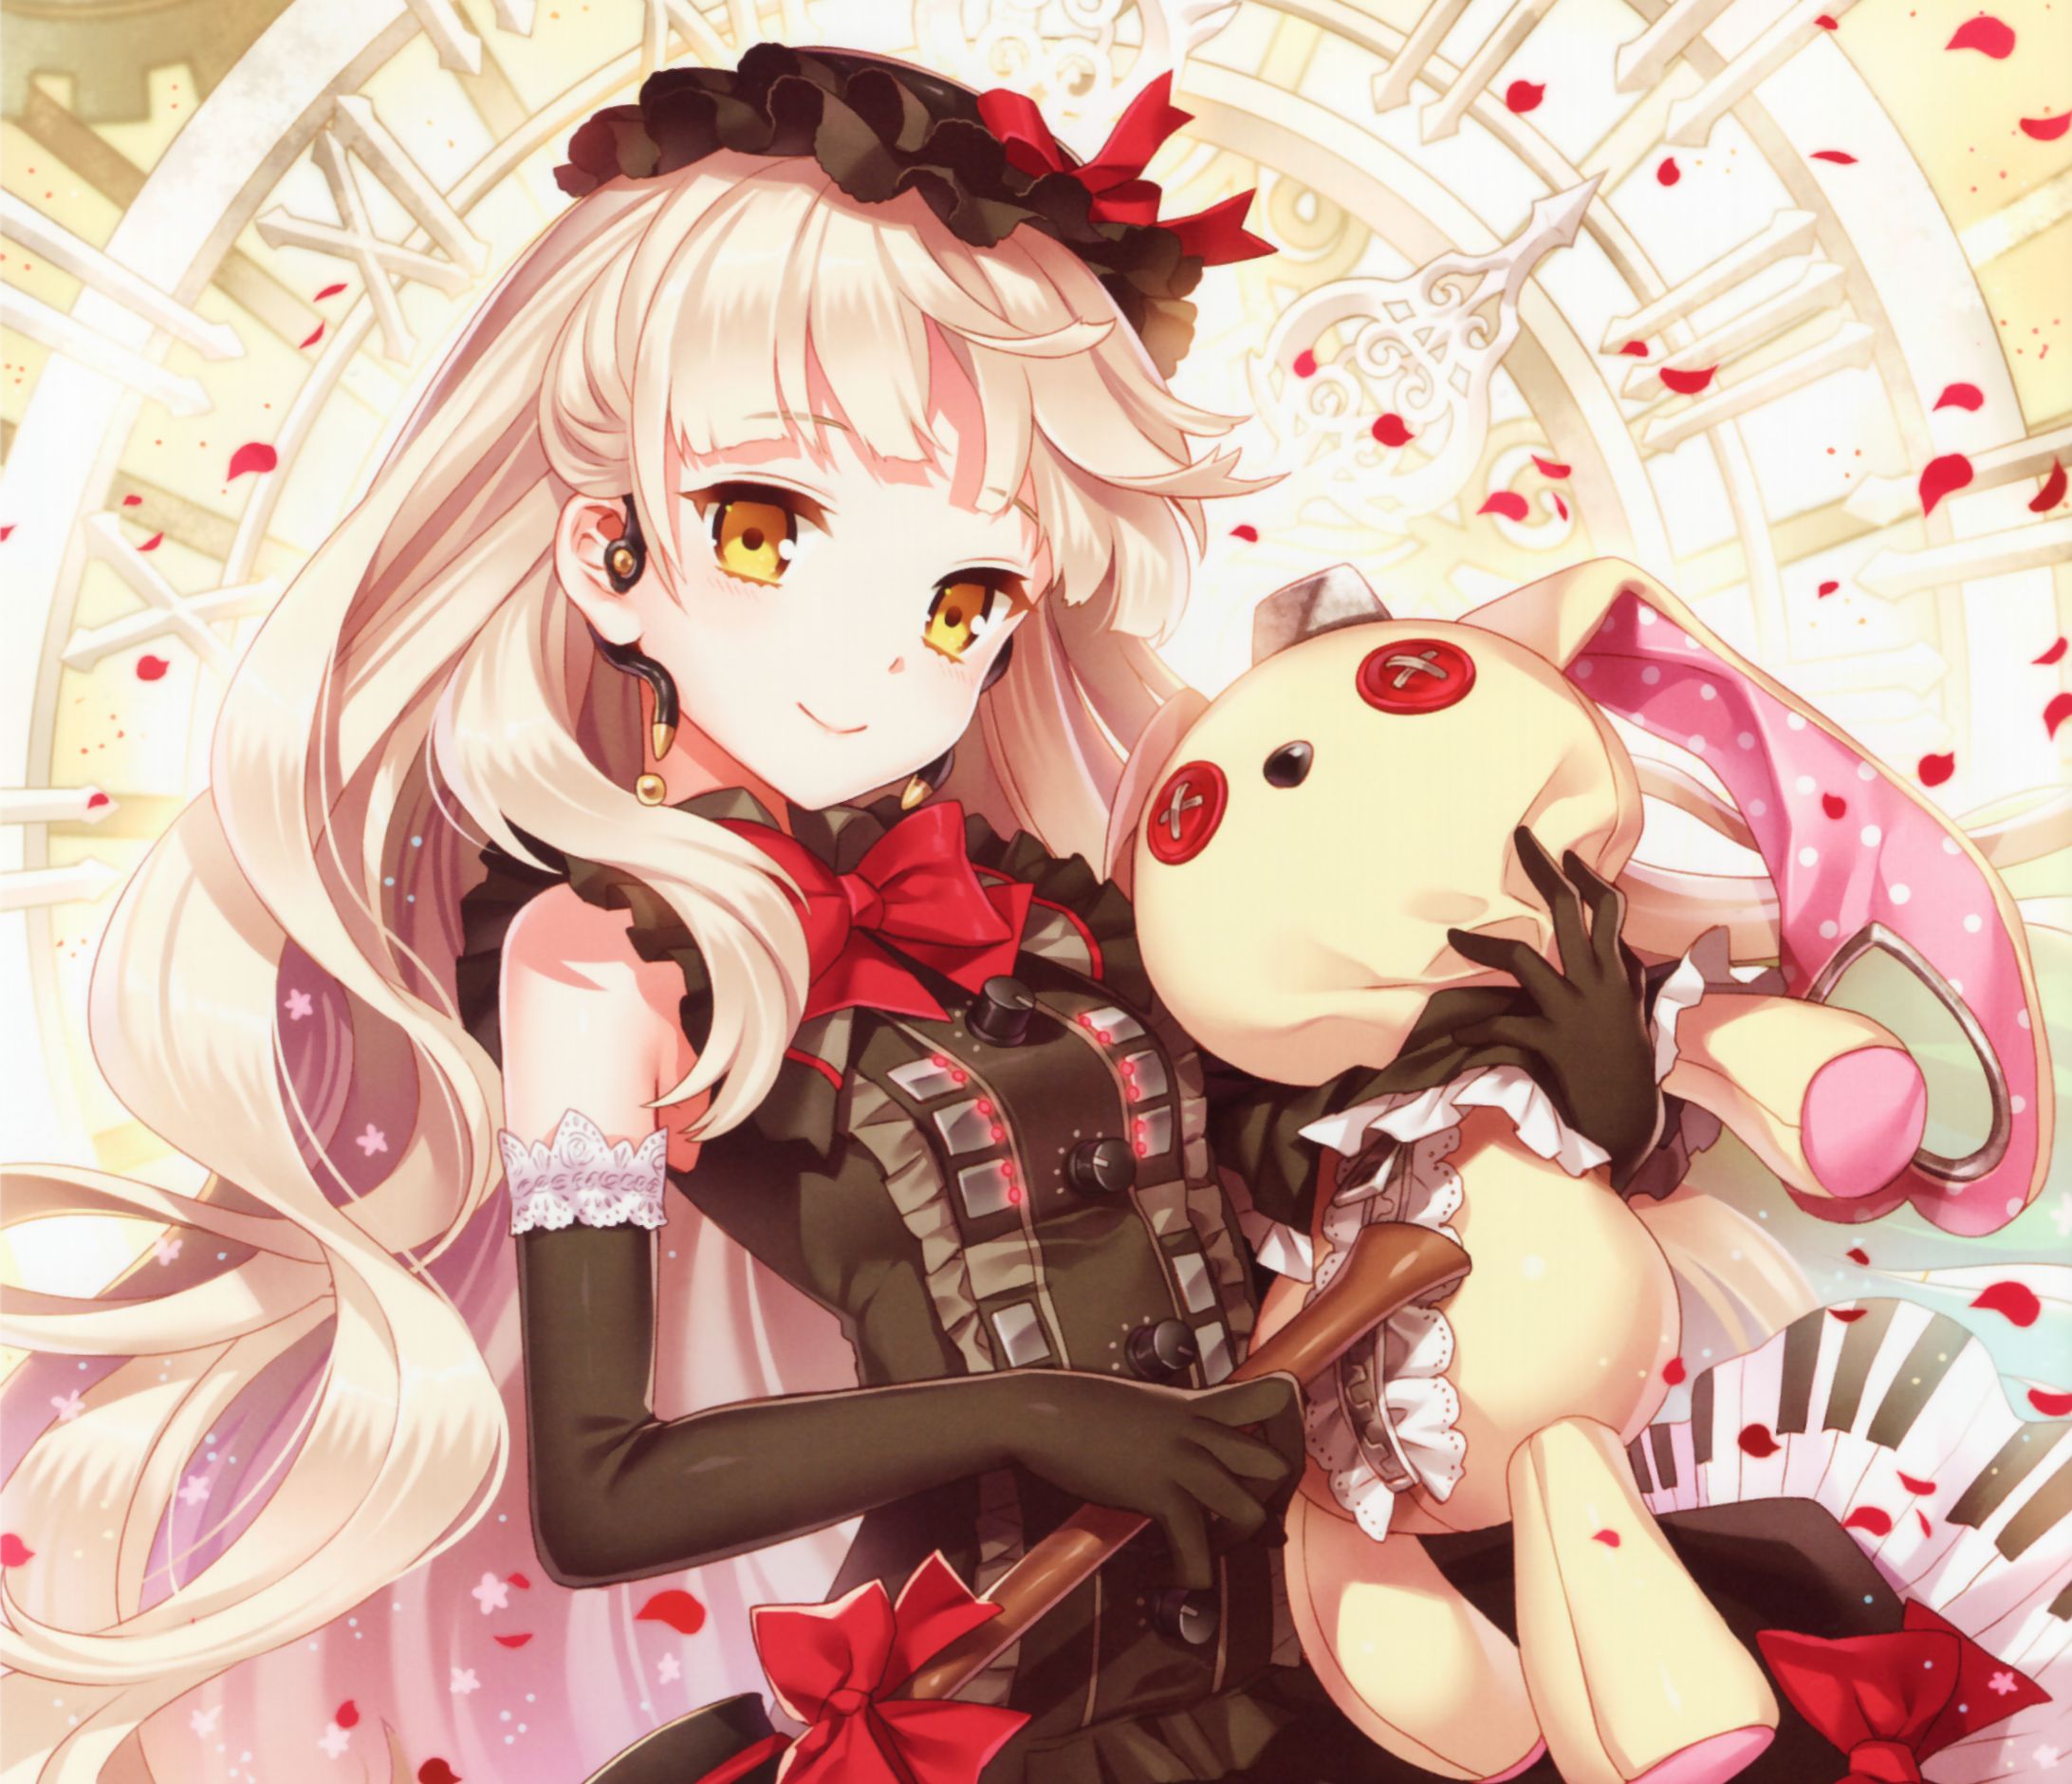 Mayu (Vocaloid) wallpapers for desktop, download free Mayu